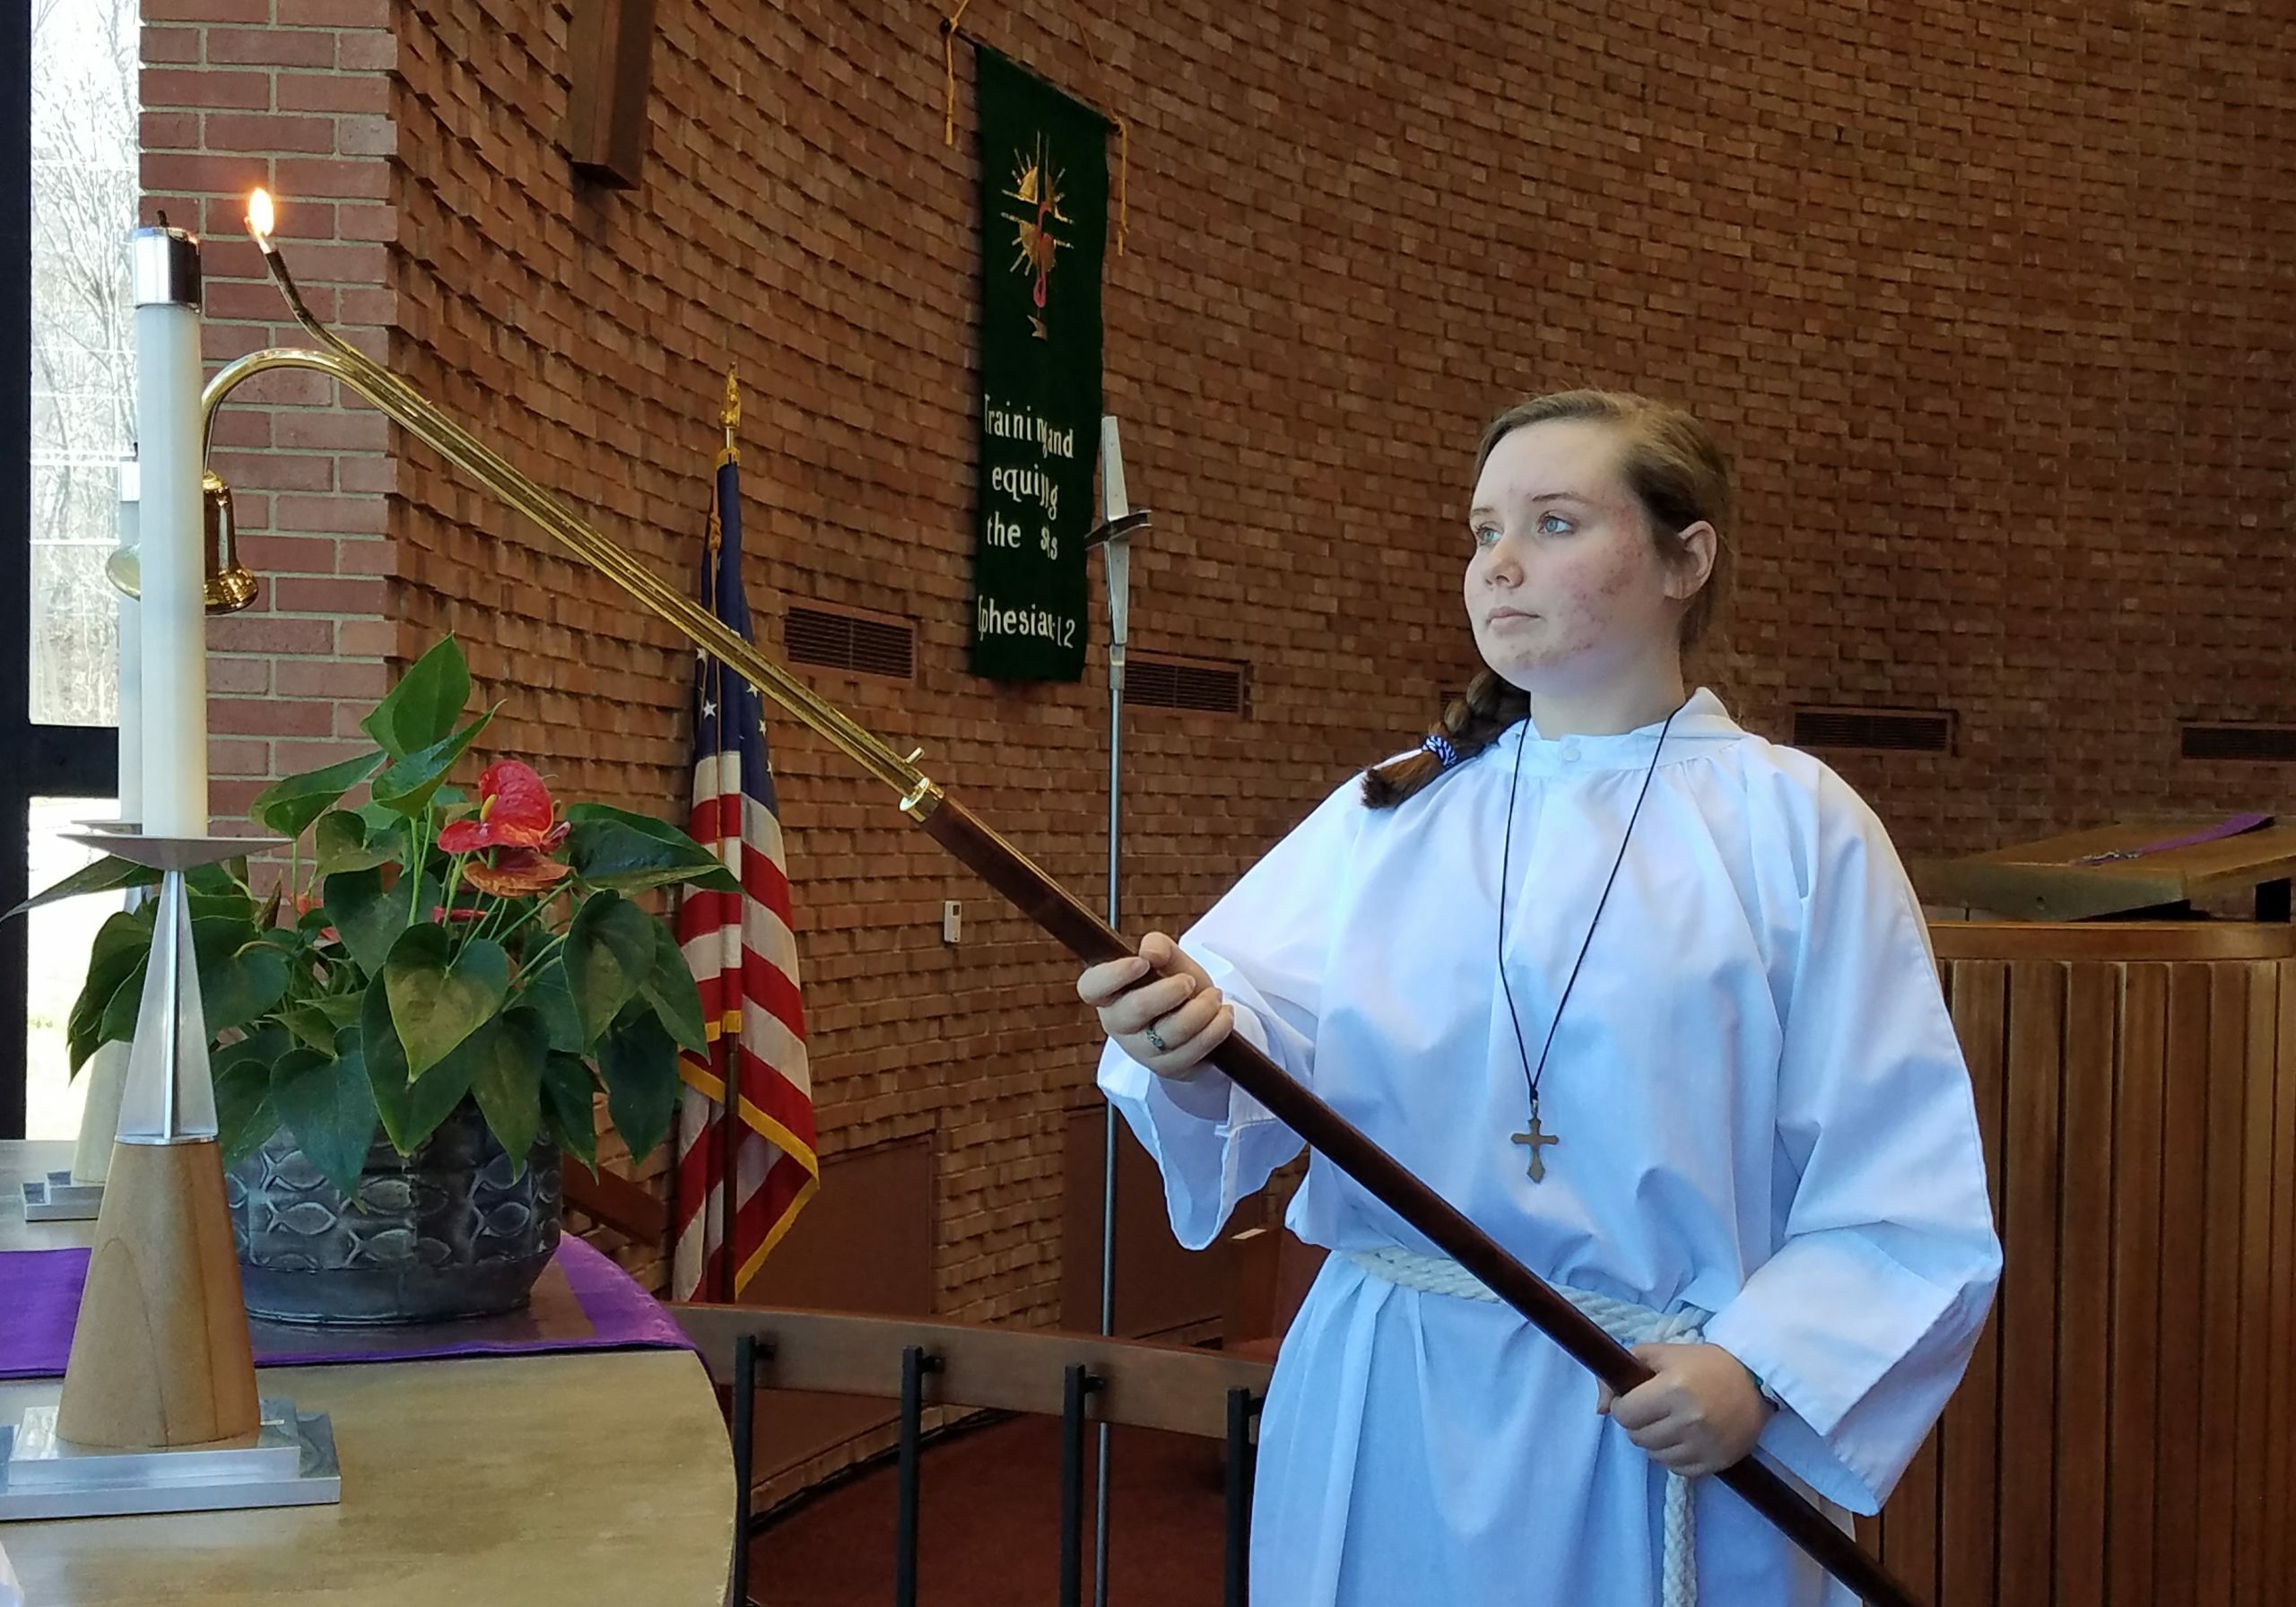 acolyte first lutheran church chattanooga tn